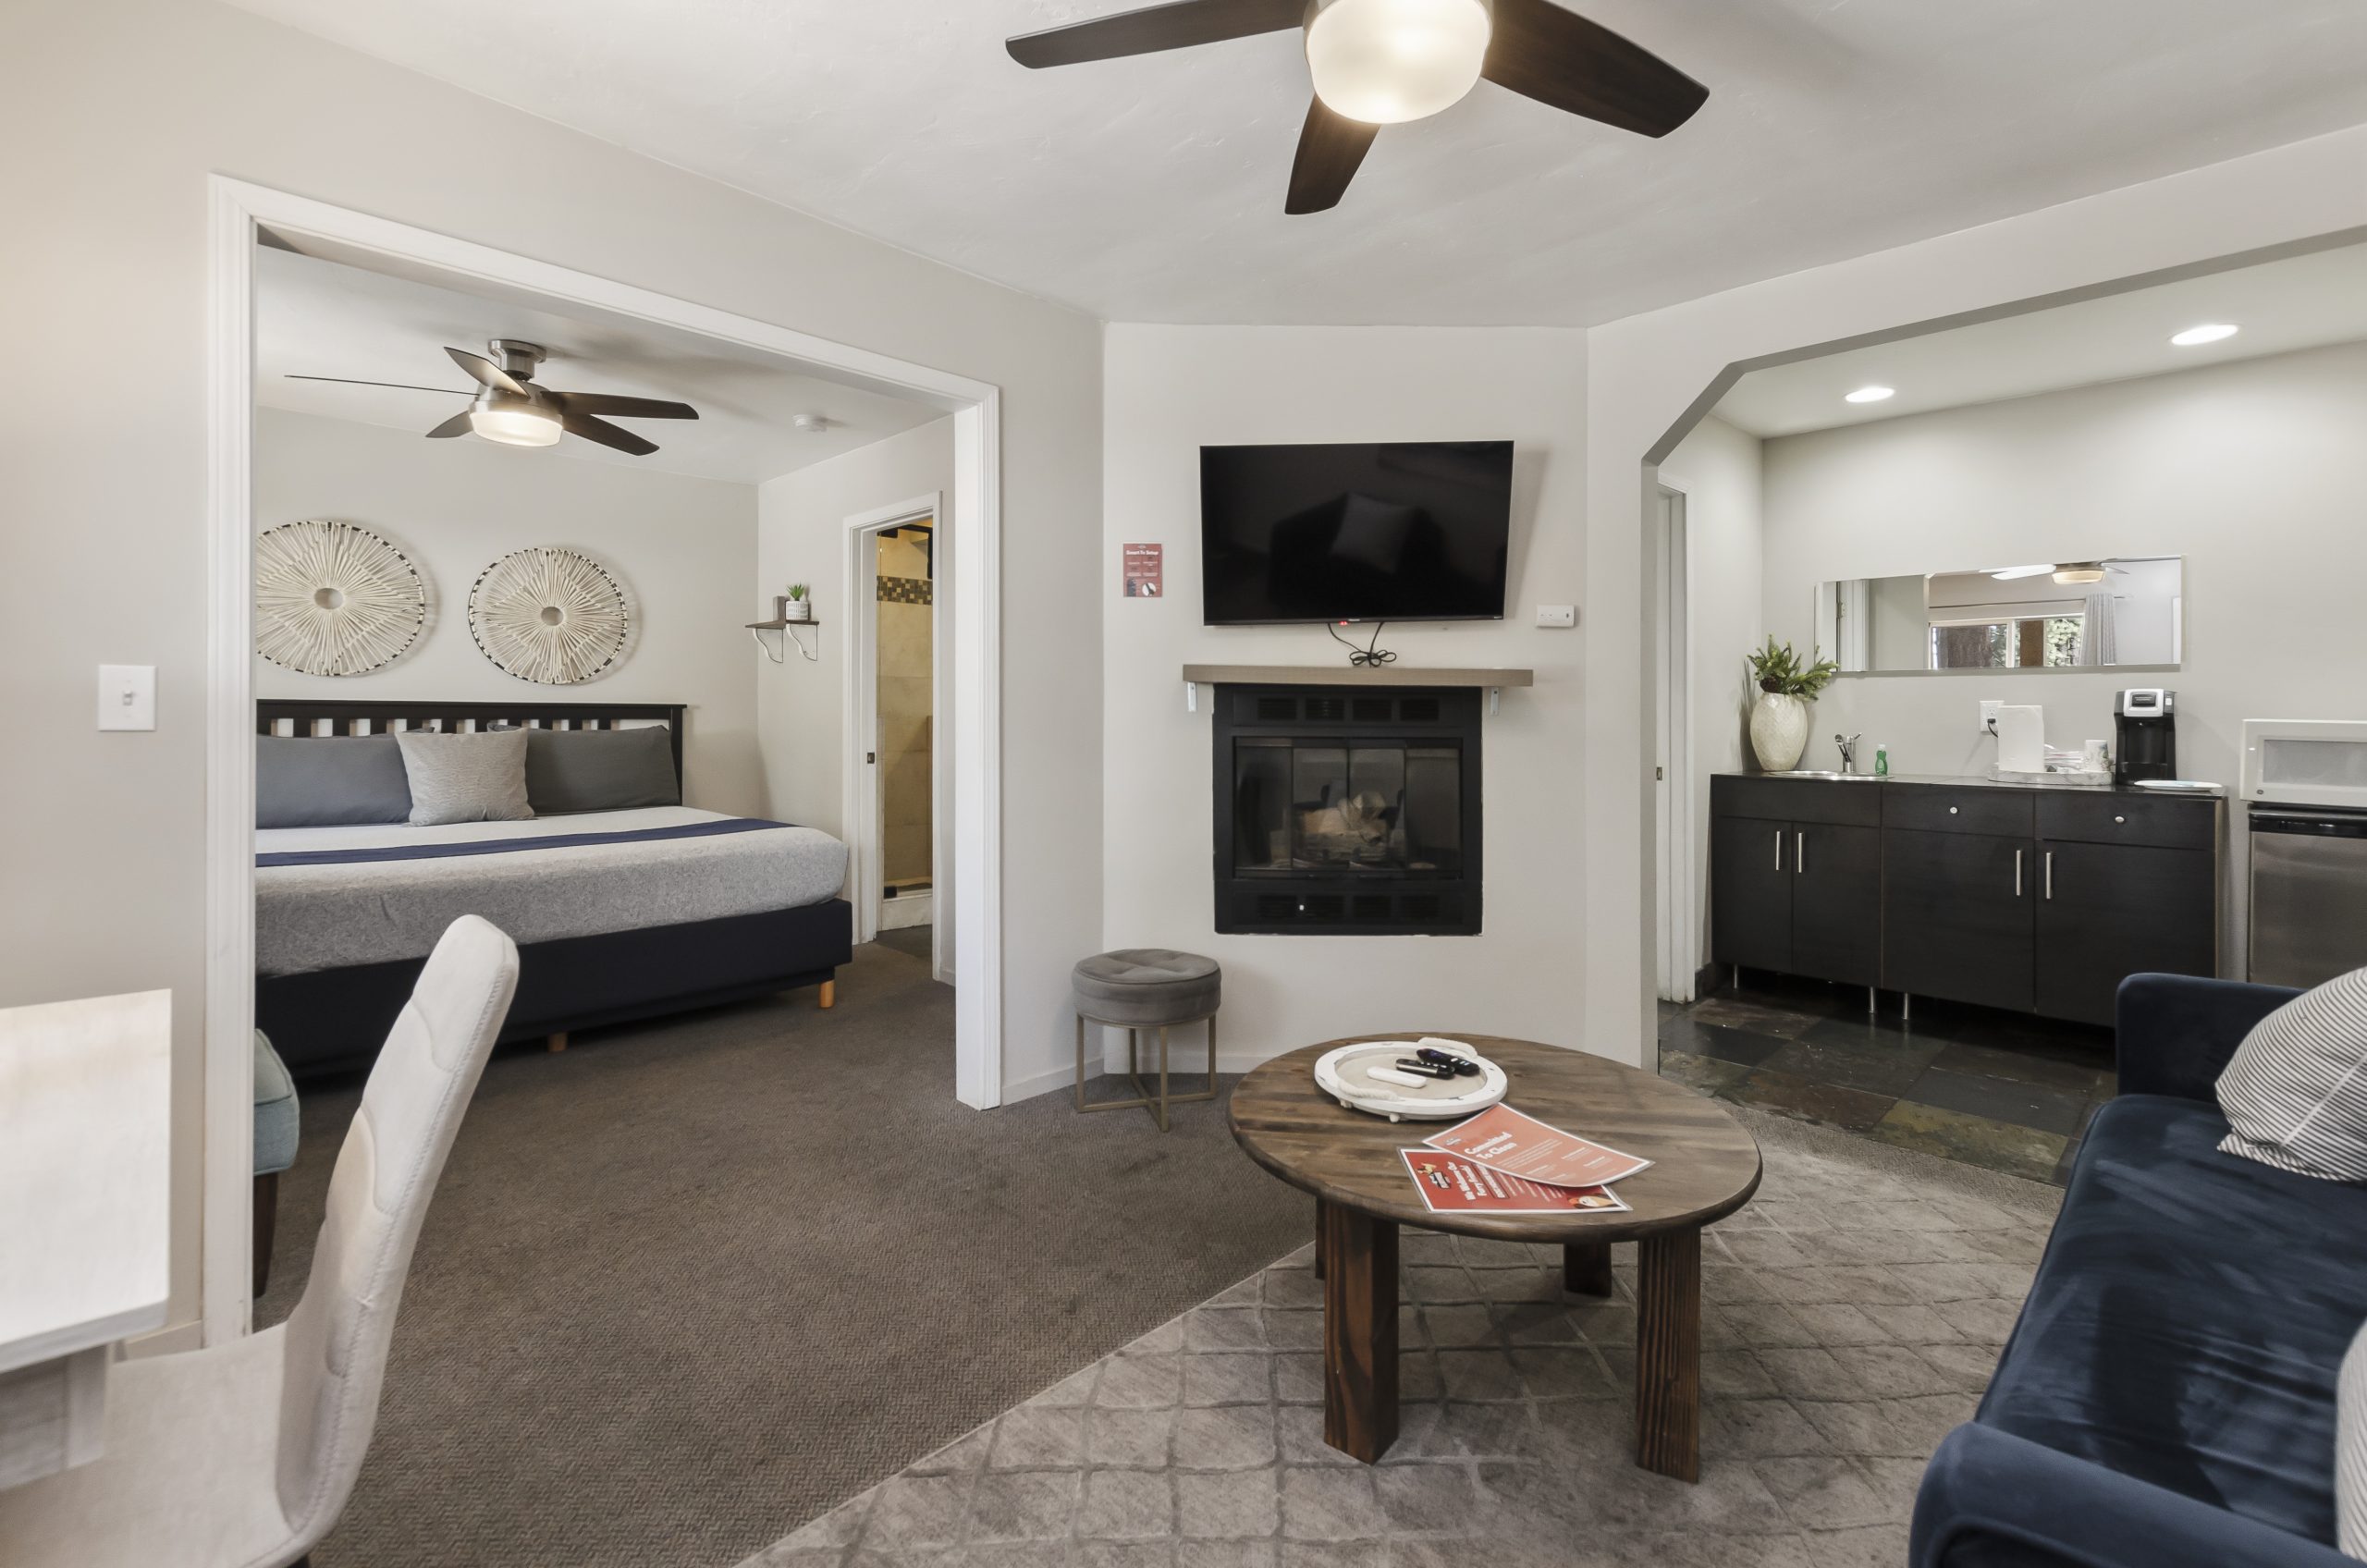 Signature King Suite by one of the best contactless Hotels in Lake Tahoe by Playpark Hotels